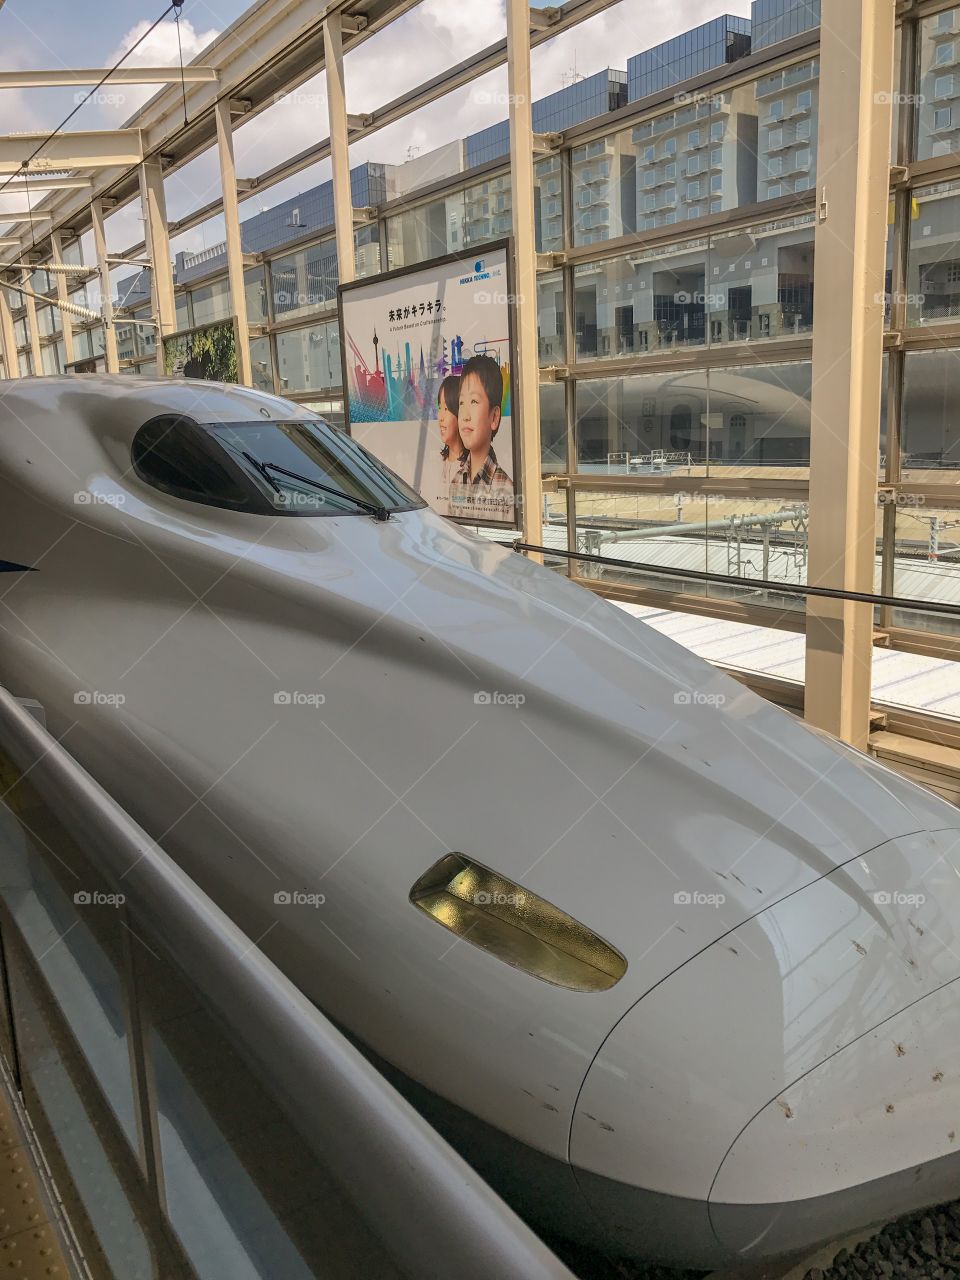 The iconic Bullet train of Japan ...still sleek fast & on time!